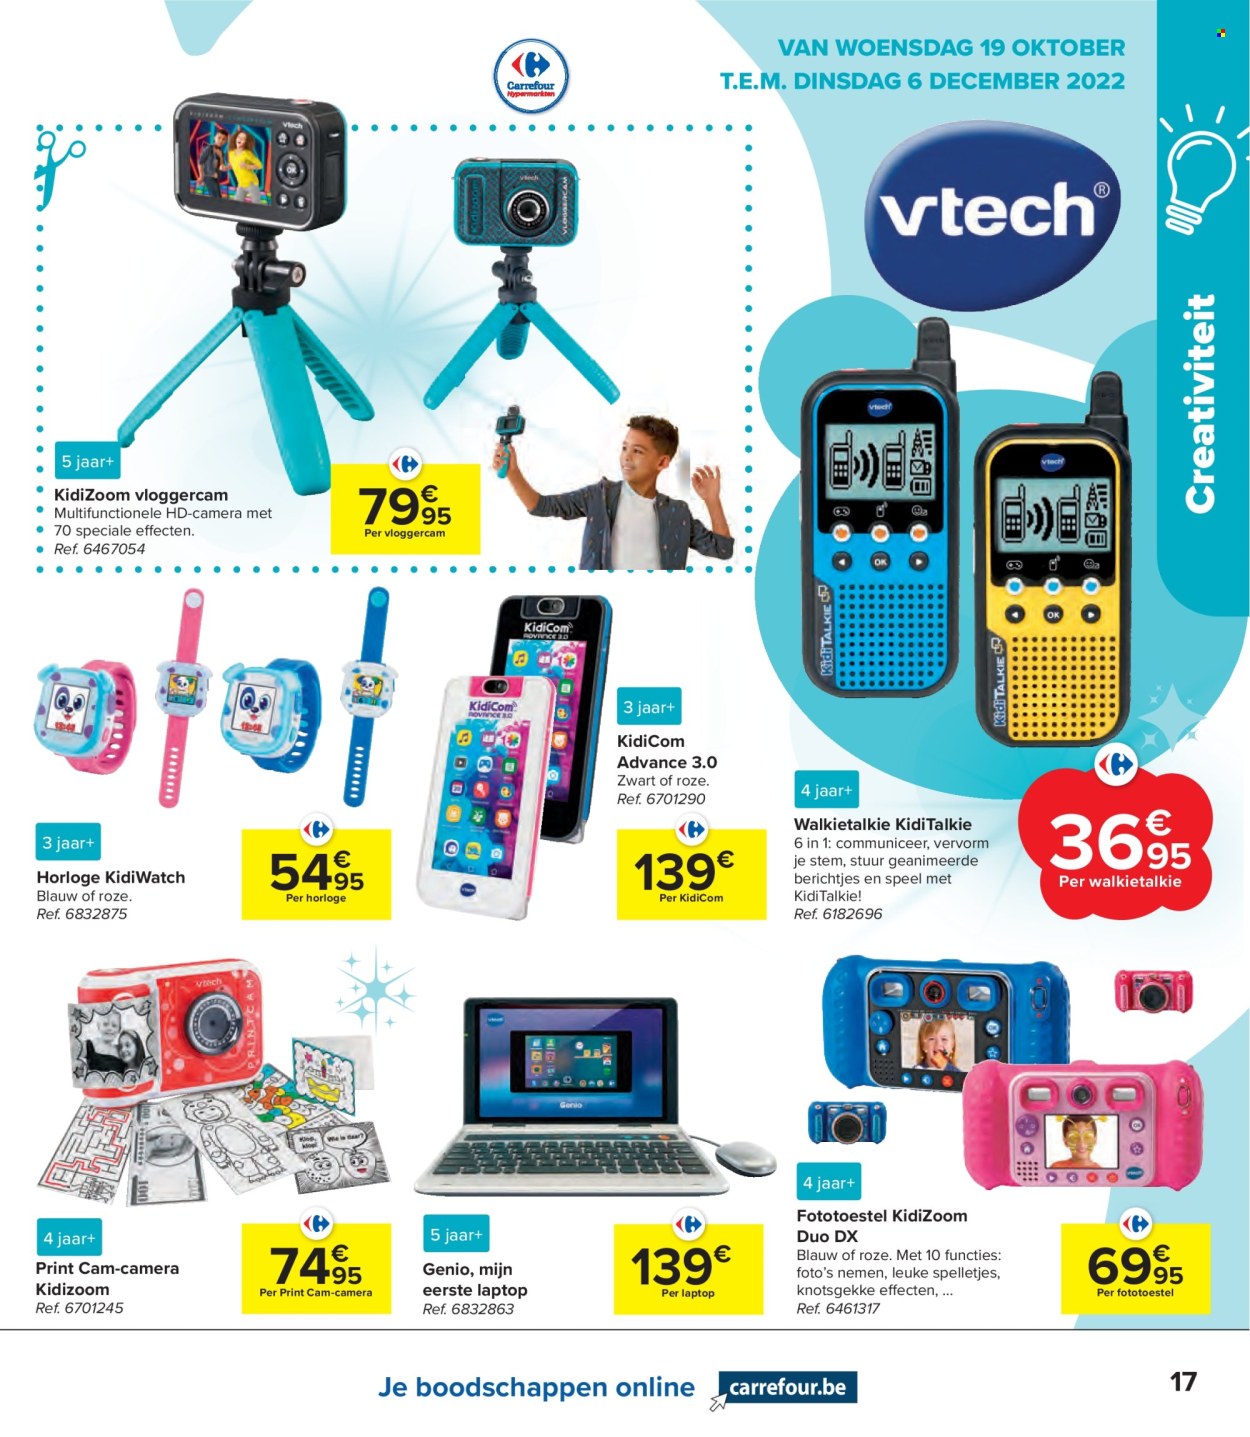 Catalogue Carrefour hypermarkt - 19.10.2022 - 6.12.2022. Page 17.